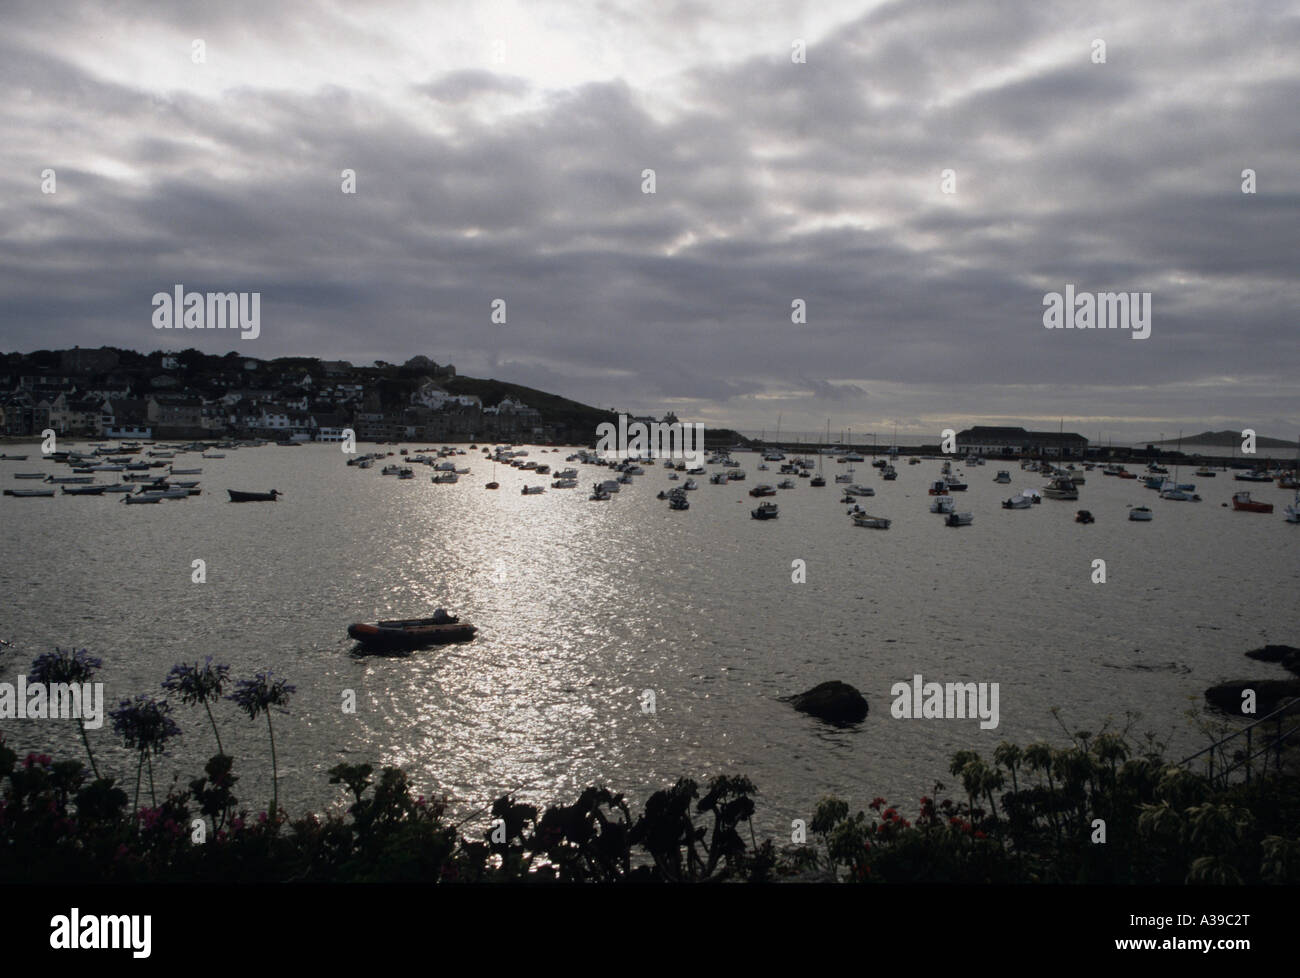 St Mary s Îles Scilly Scillies Cornwall UK Angleterre Banque D'Images